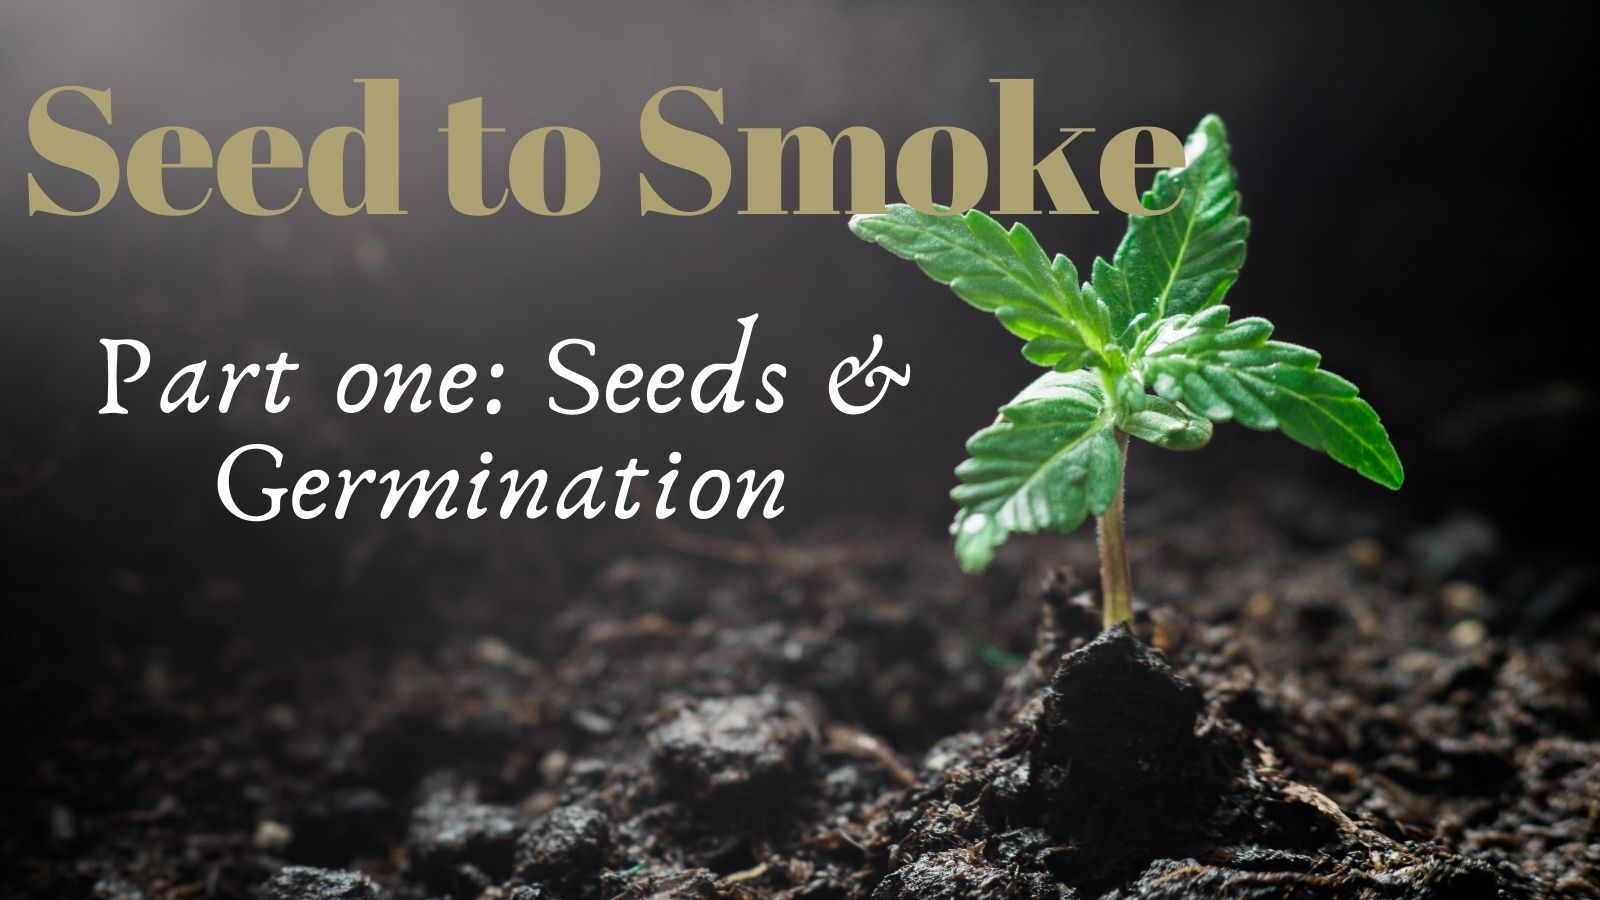 Seed to smoke part one header